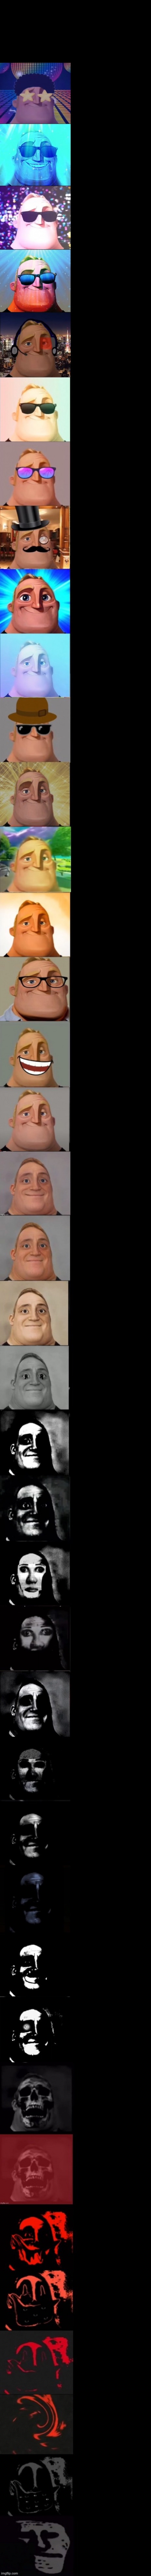 High Quality Mr Incredible Becoming Uncanny Super Extended HD Blank Meme Template